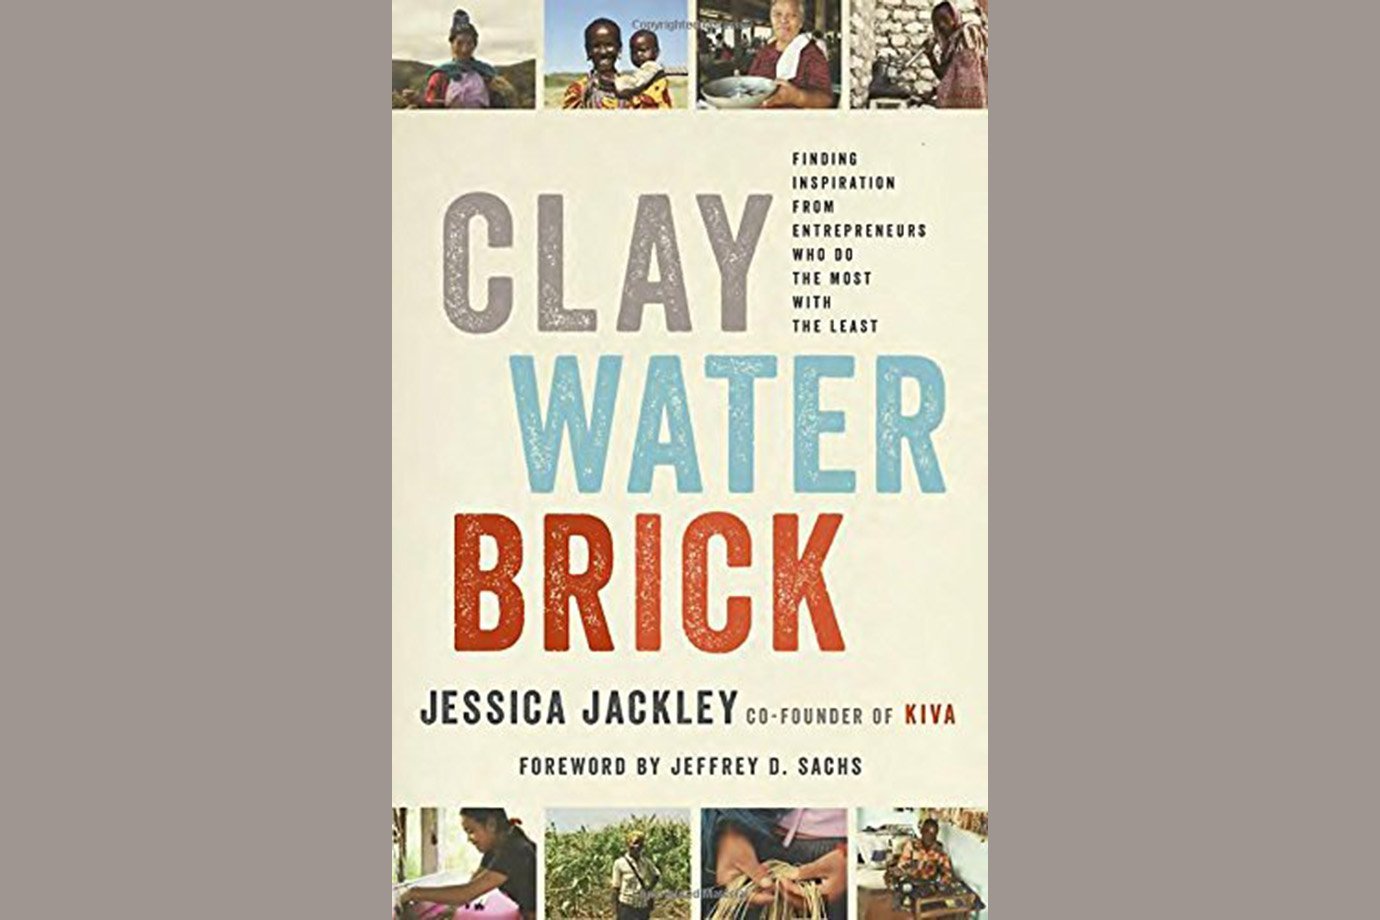 “Clay Water Brick: Finding Inspiration from Entrepreneurs Who Do the Most with the Least”